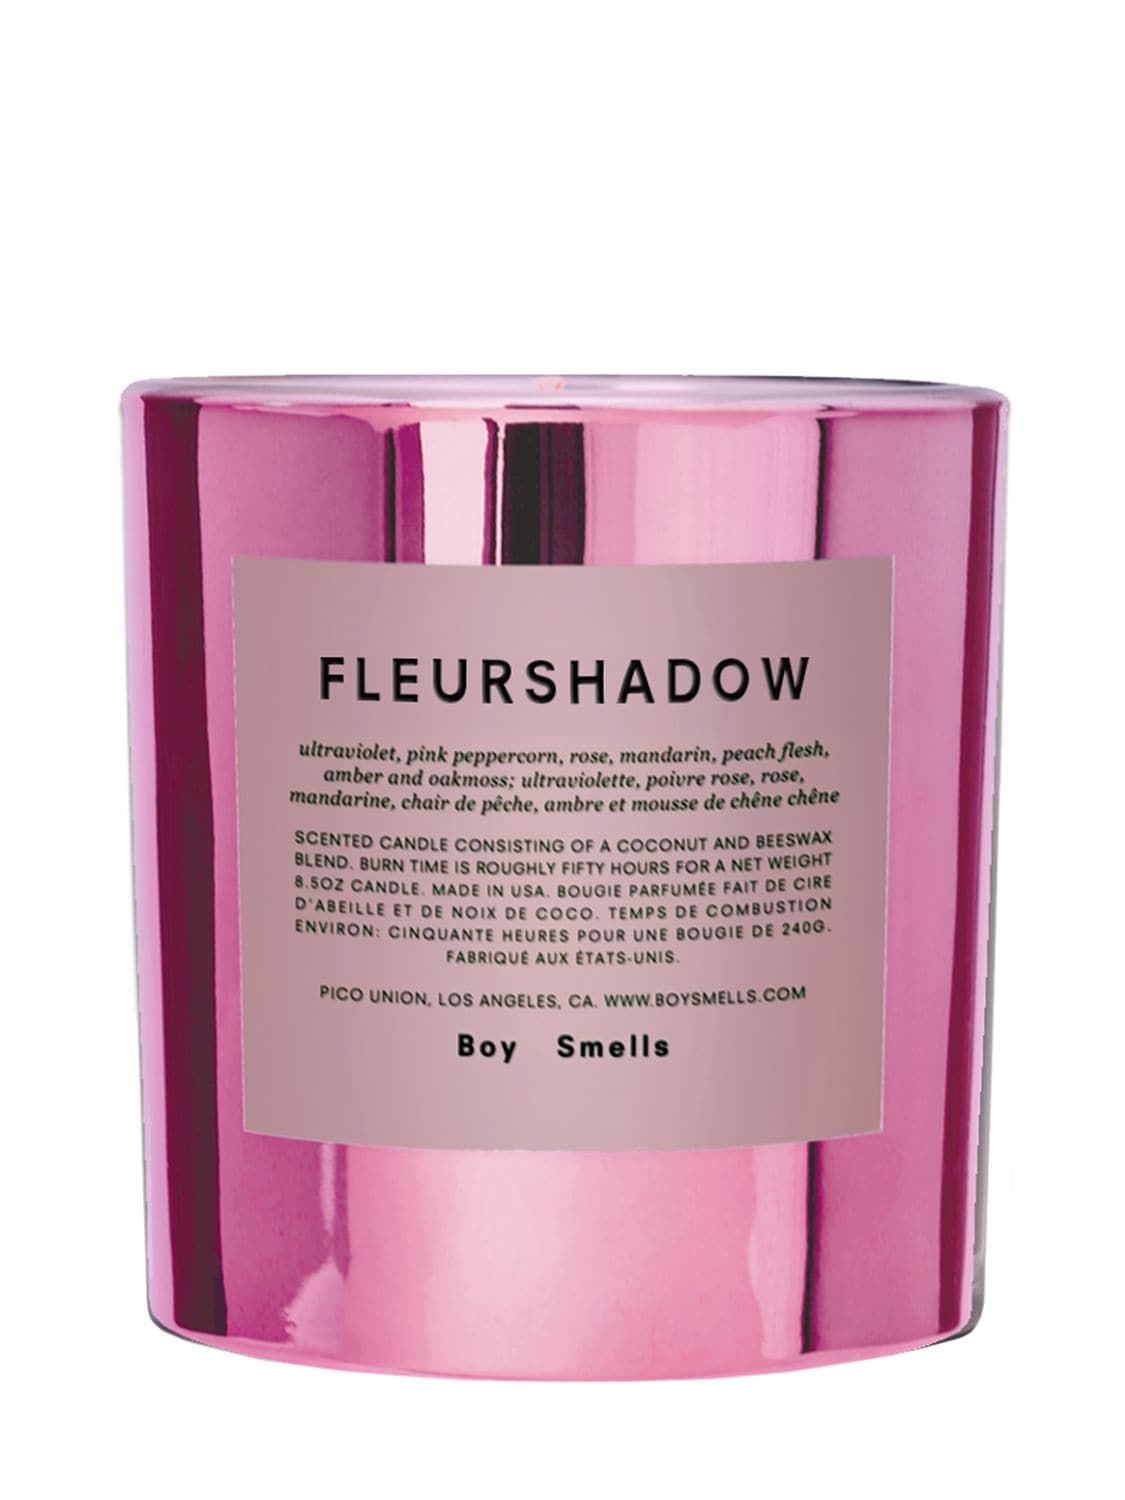 Boy Smells 240g Fleurshadow Scented Candle In Transparent